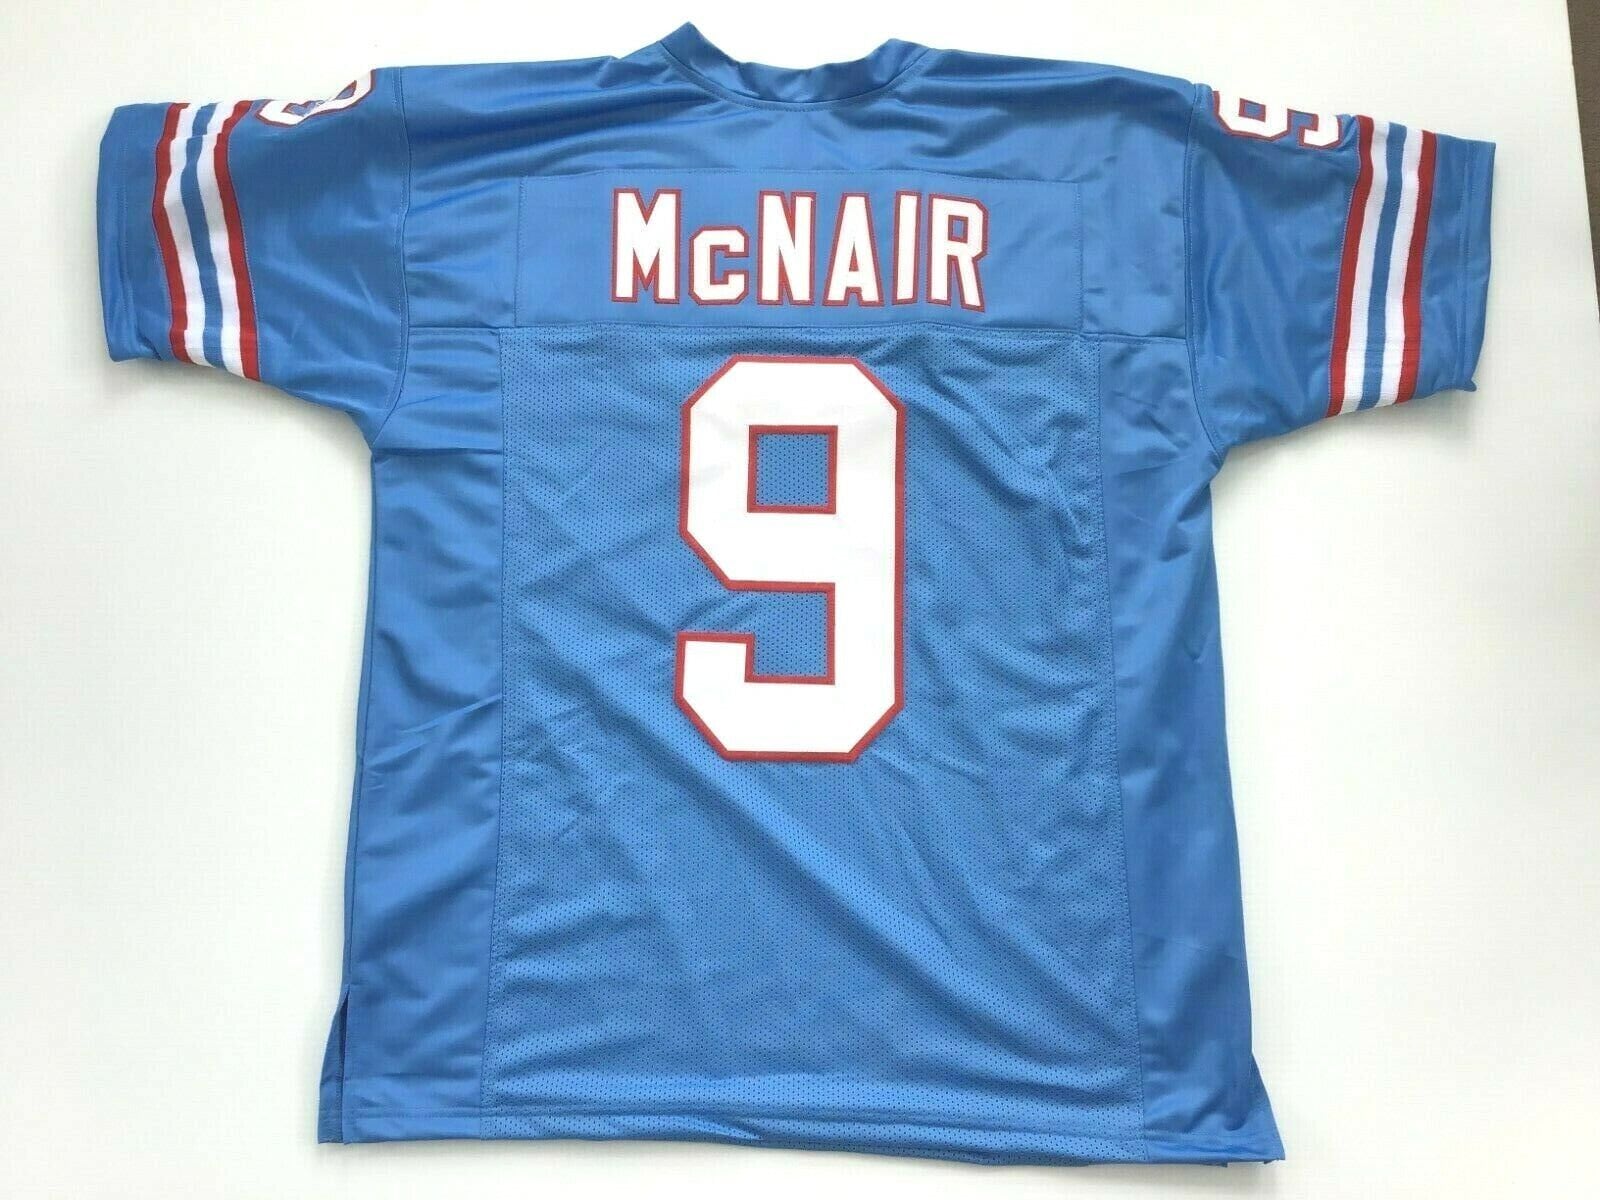 TENNESSEE TITANS STEVE MCNAIR FOOTBALL JERSEY SIZE XL 18-20 YOUTH